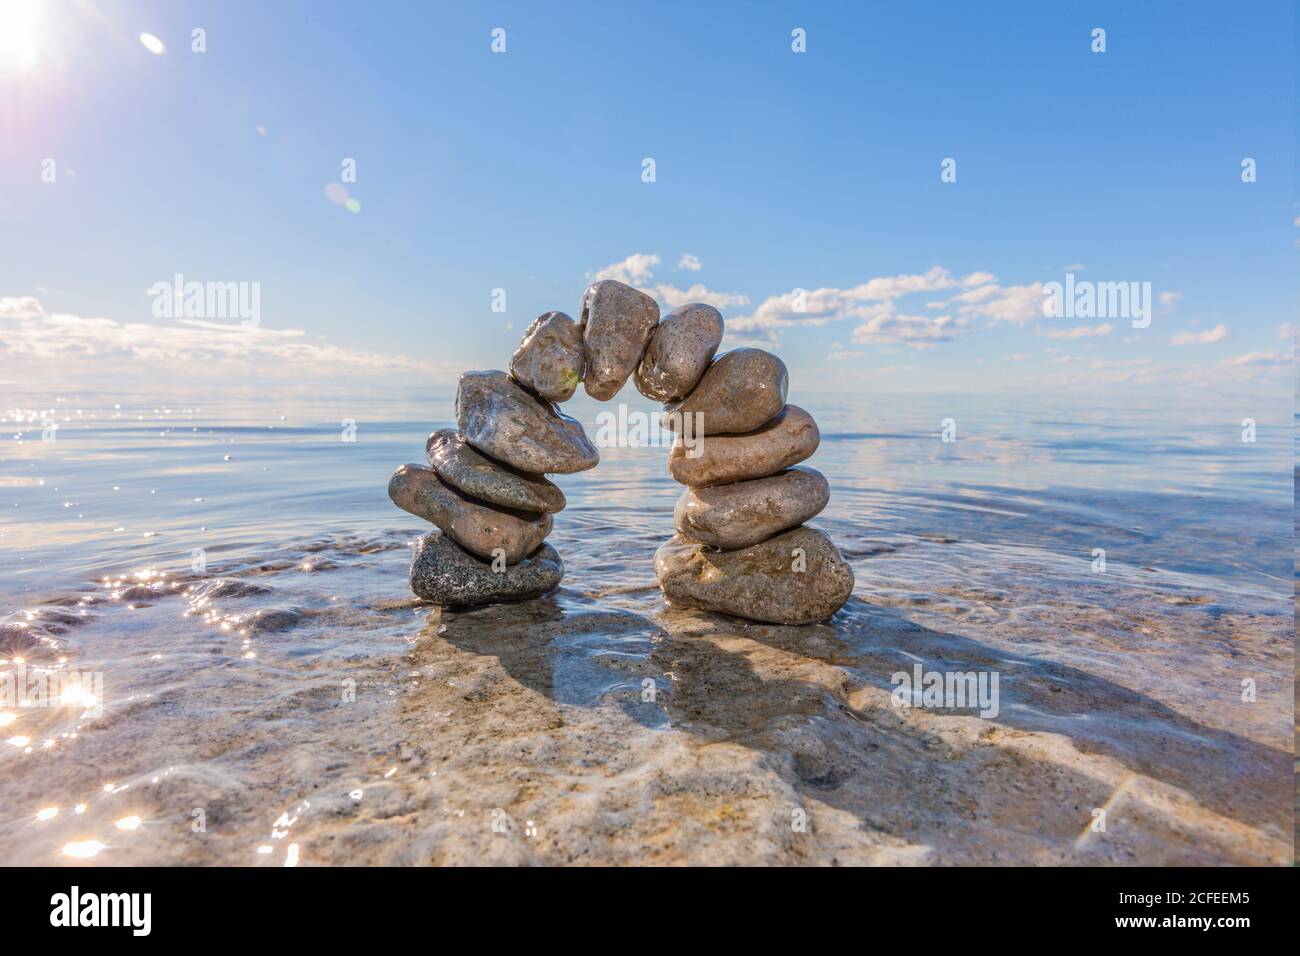 Stone arch made of pebbles in the water Stock Photo